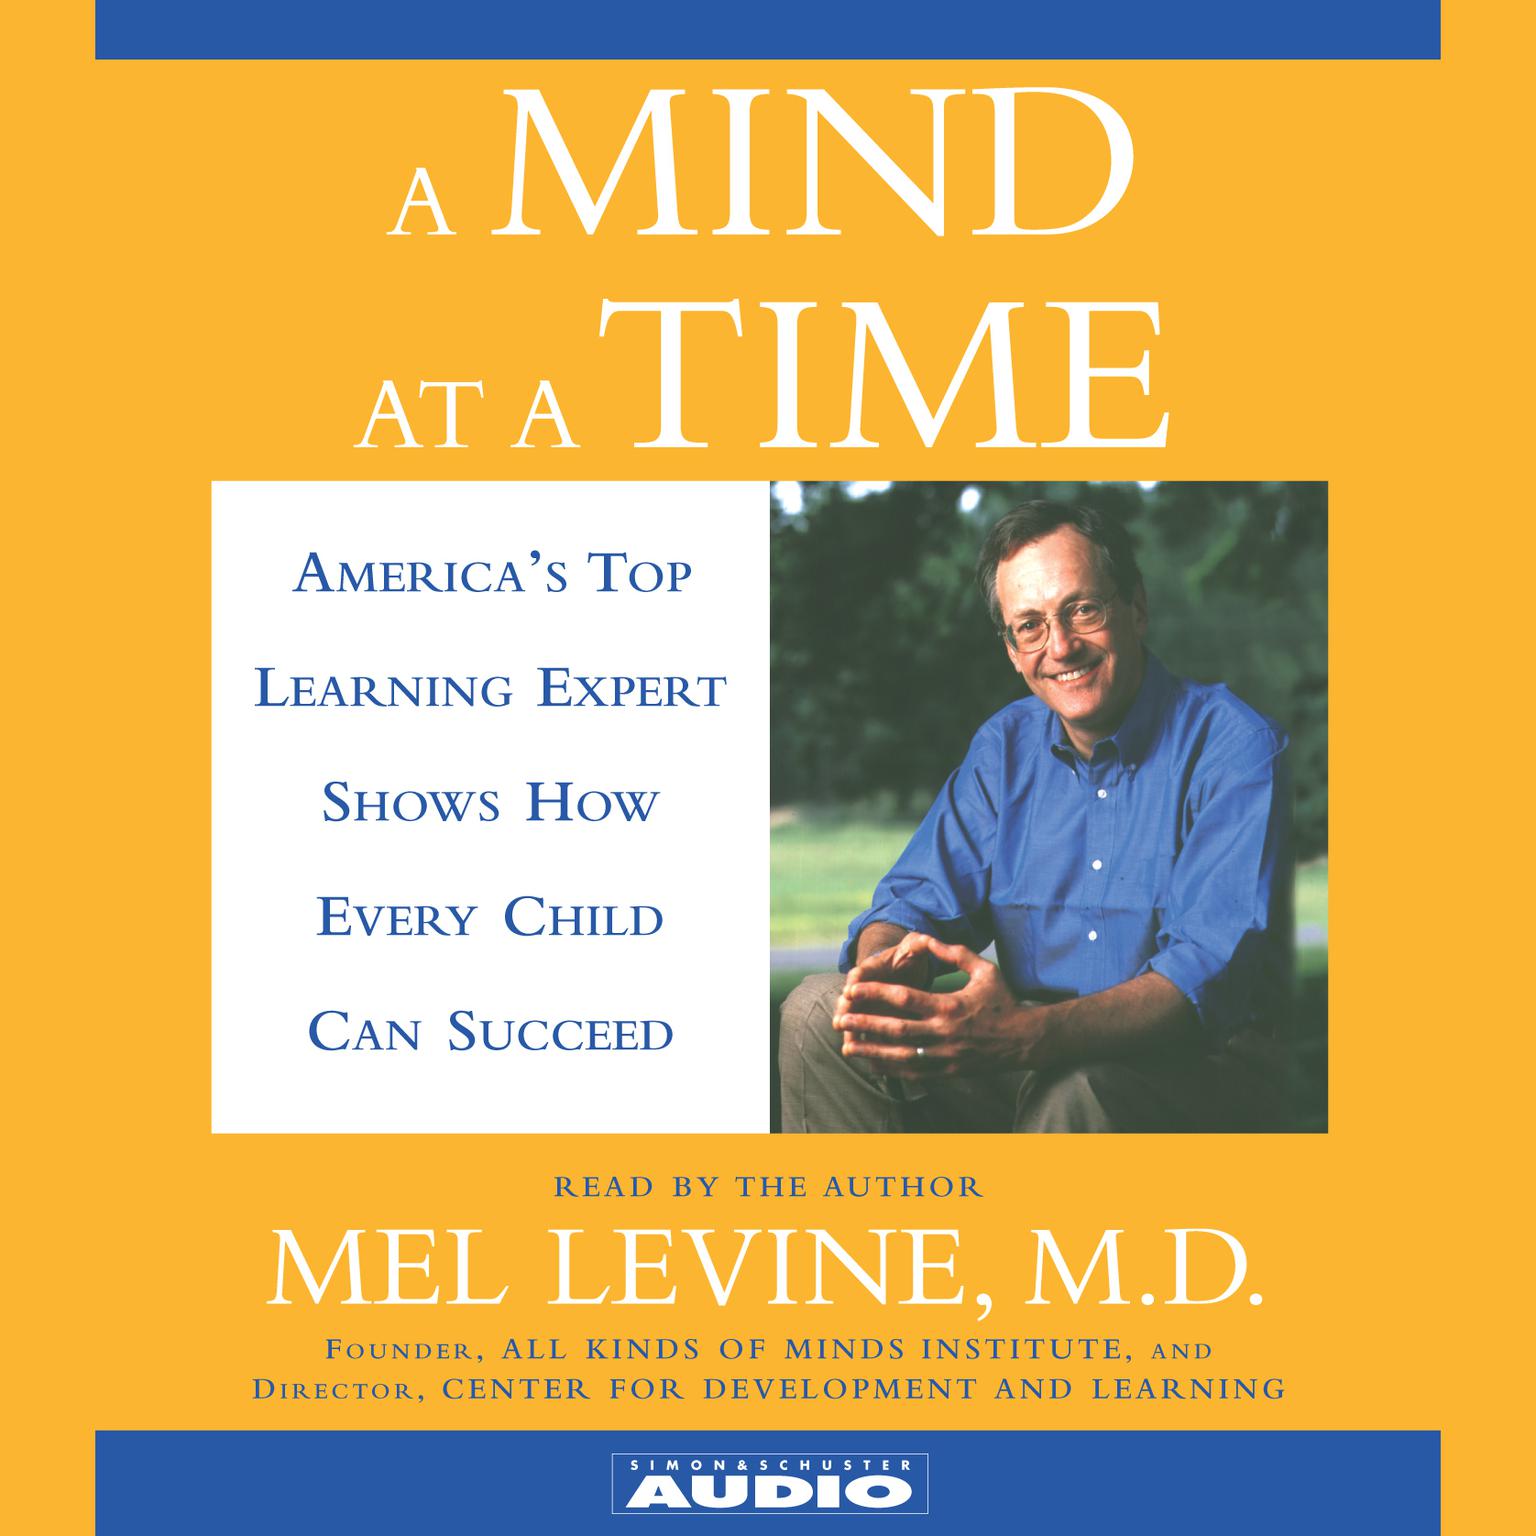 A Mind at a Time (Abridged): Americas Top Learning Expert Shows How Every Child Can Succeed Audiobook, by Mel Levine